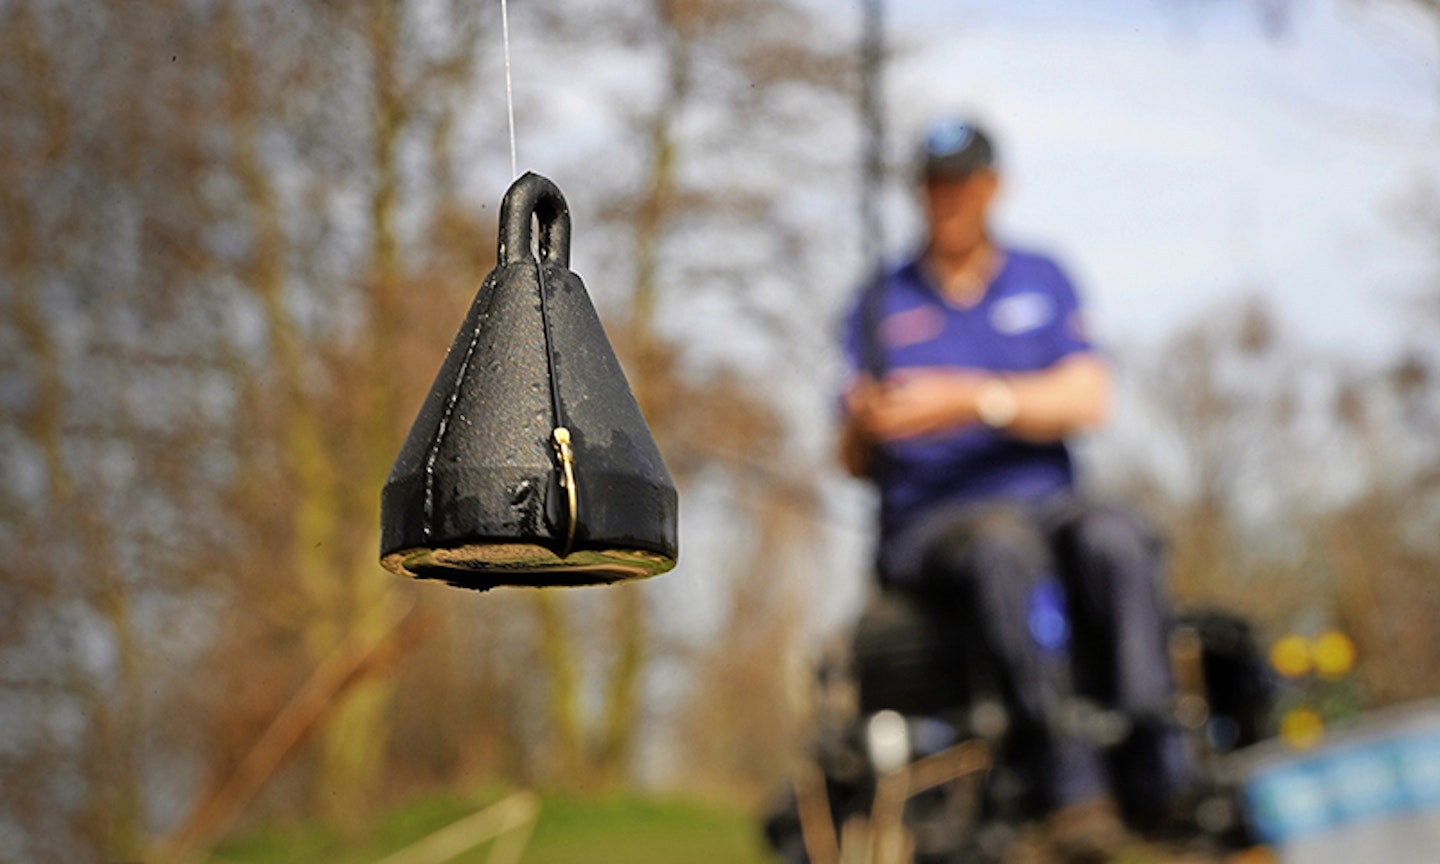 HOW TO PLUMB THE DEPTH CORRECTLY WHEN FISHING